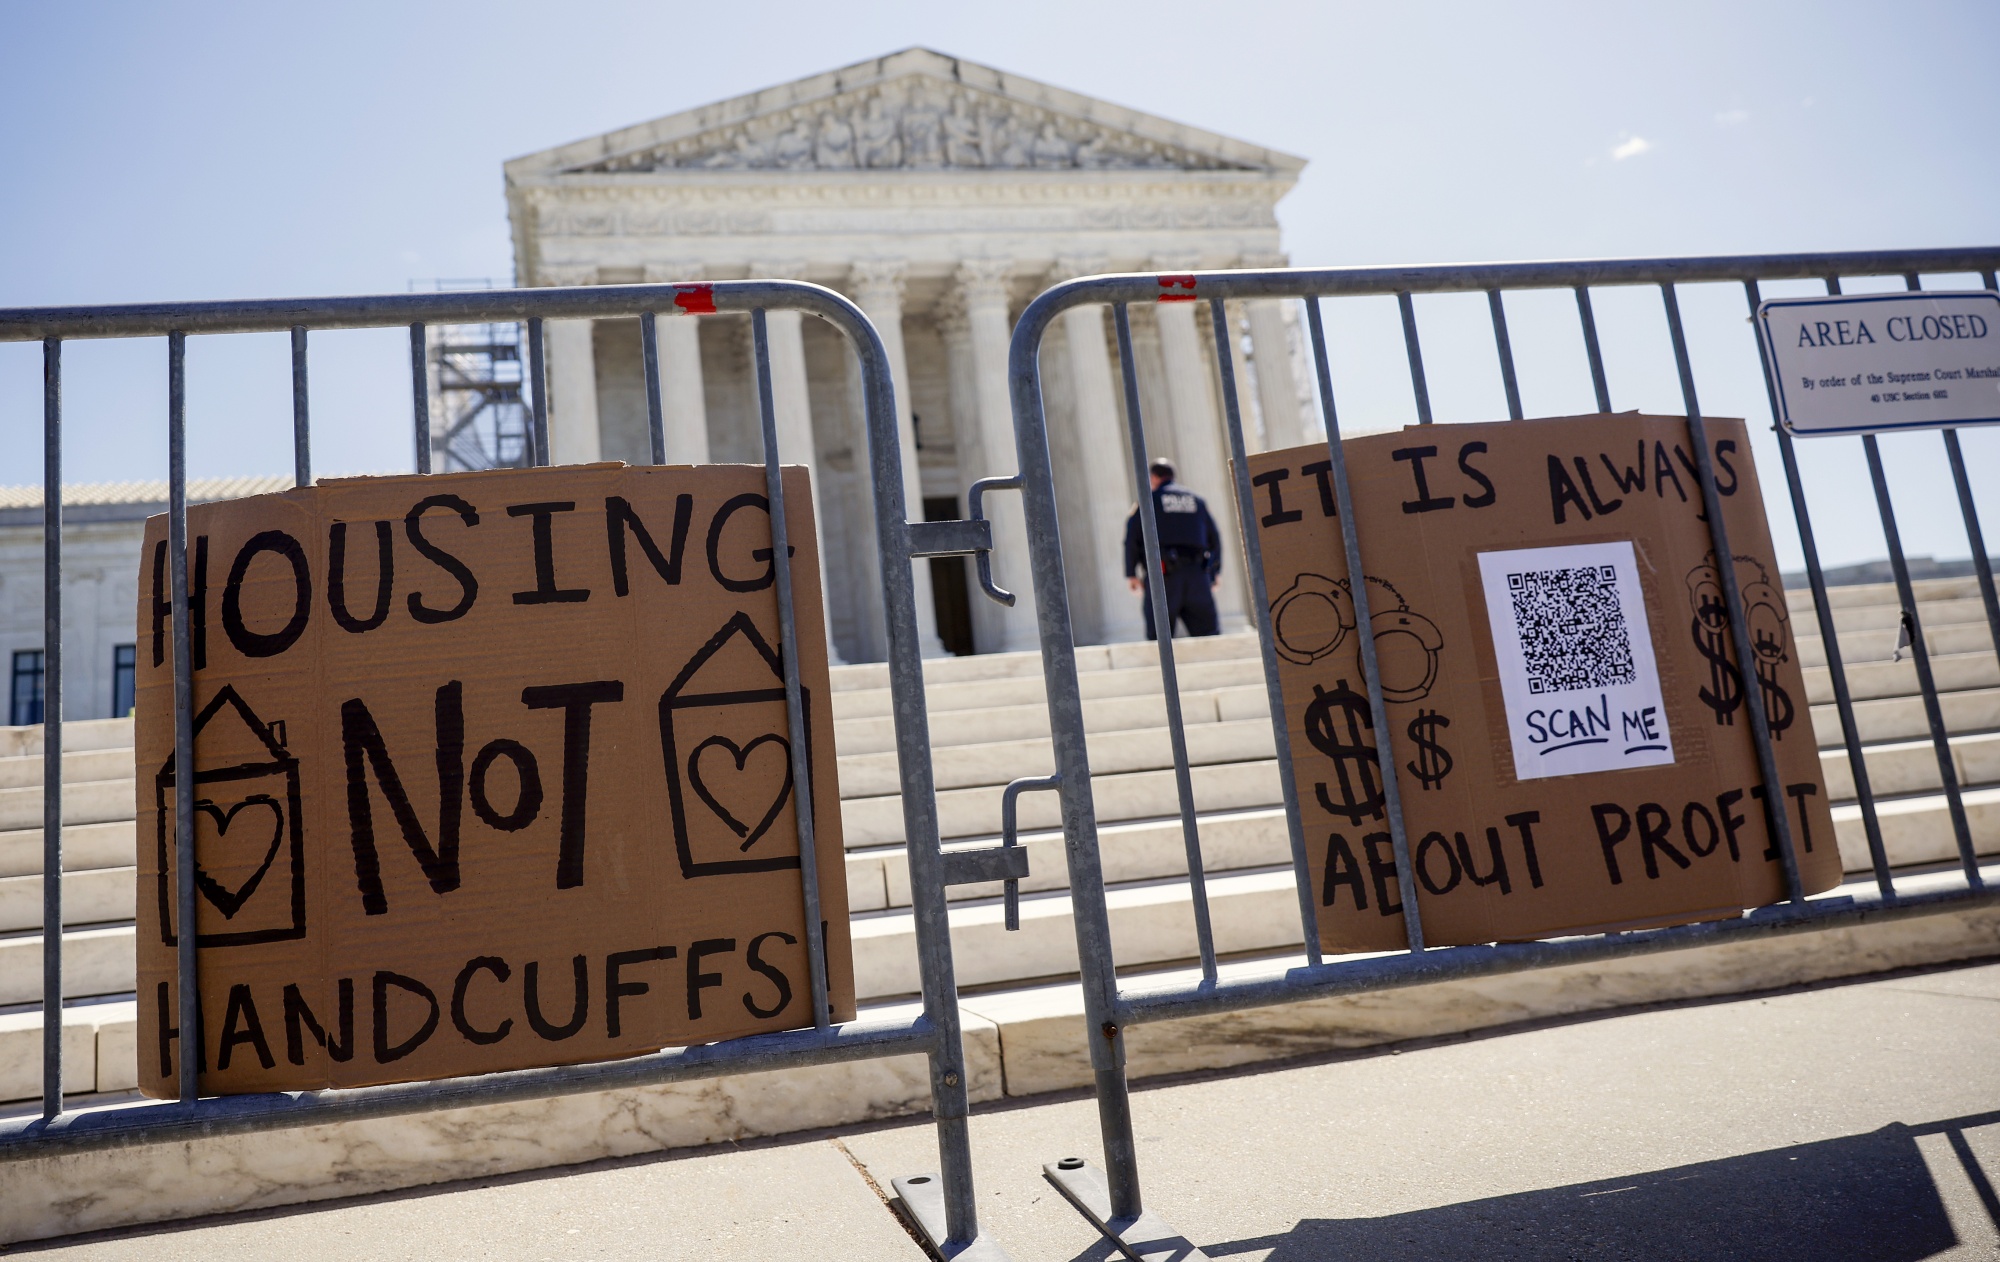 Homelessness Criminalization and Camp Disbandment Cases Are Being Heard by the Supreme Court